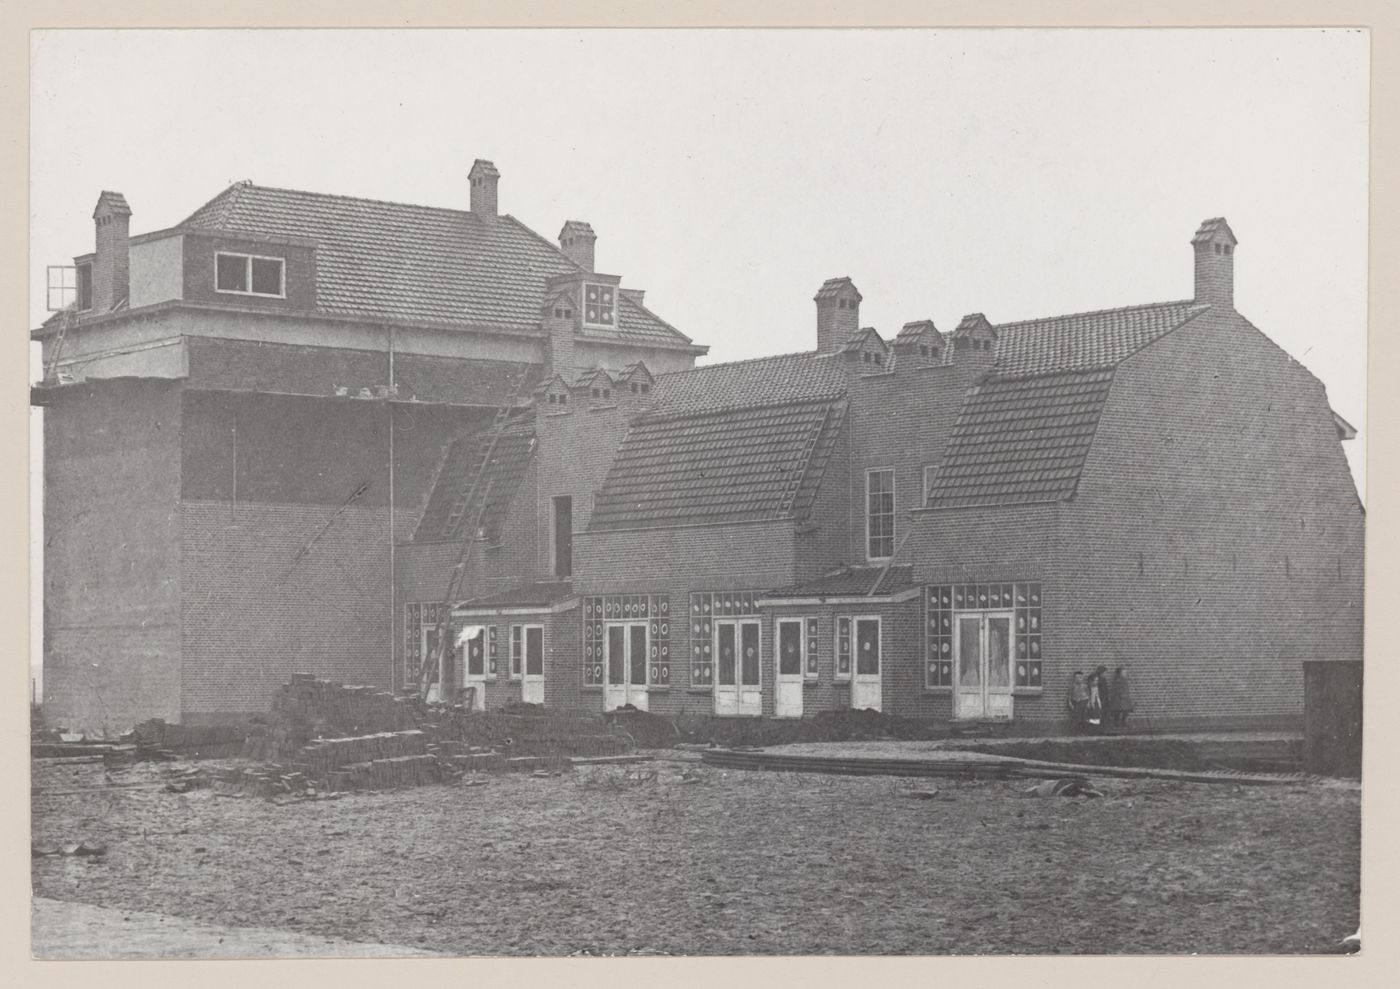 Exterior view of houses and the meeting hall, Vooruit Cooperative, Purmerend, Netherlands